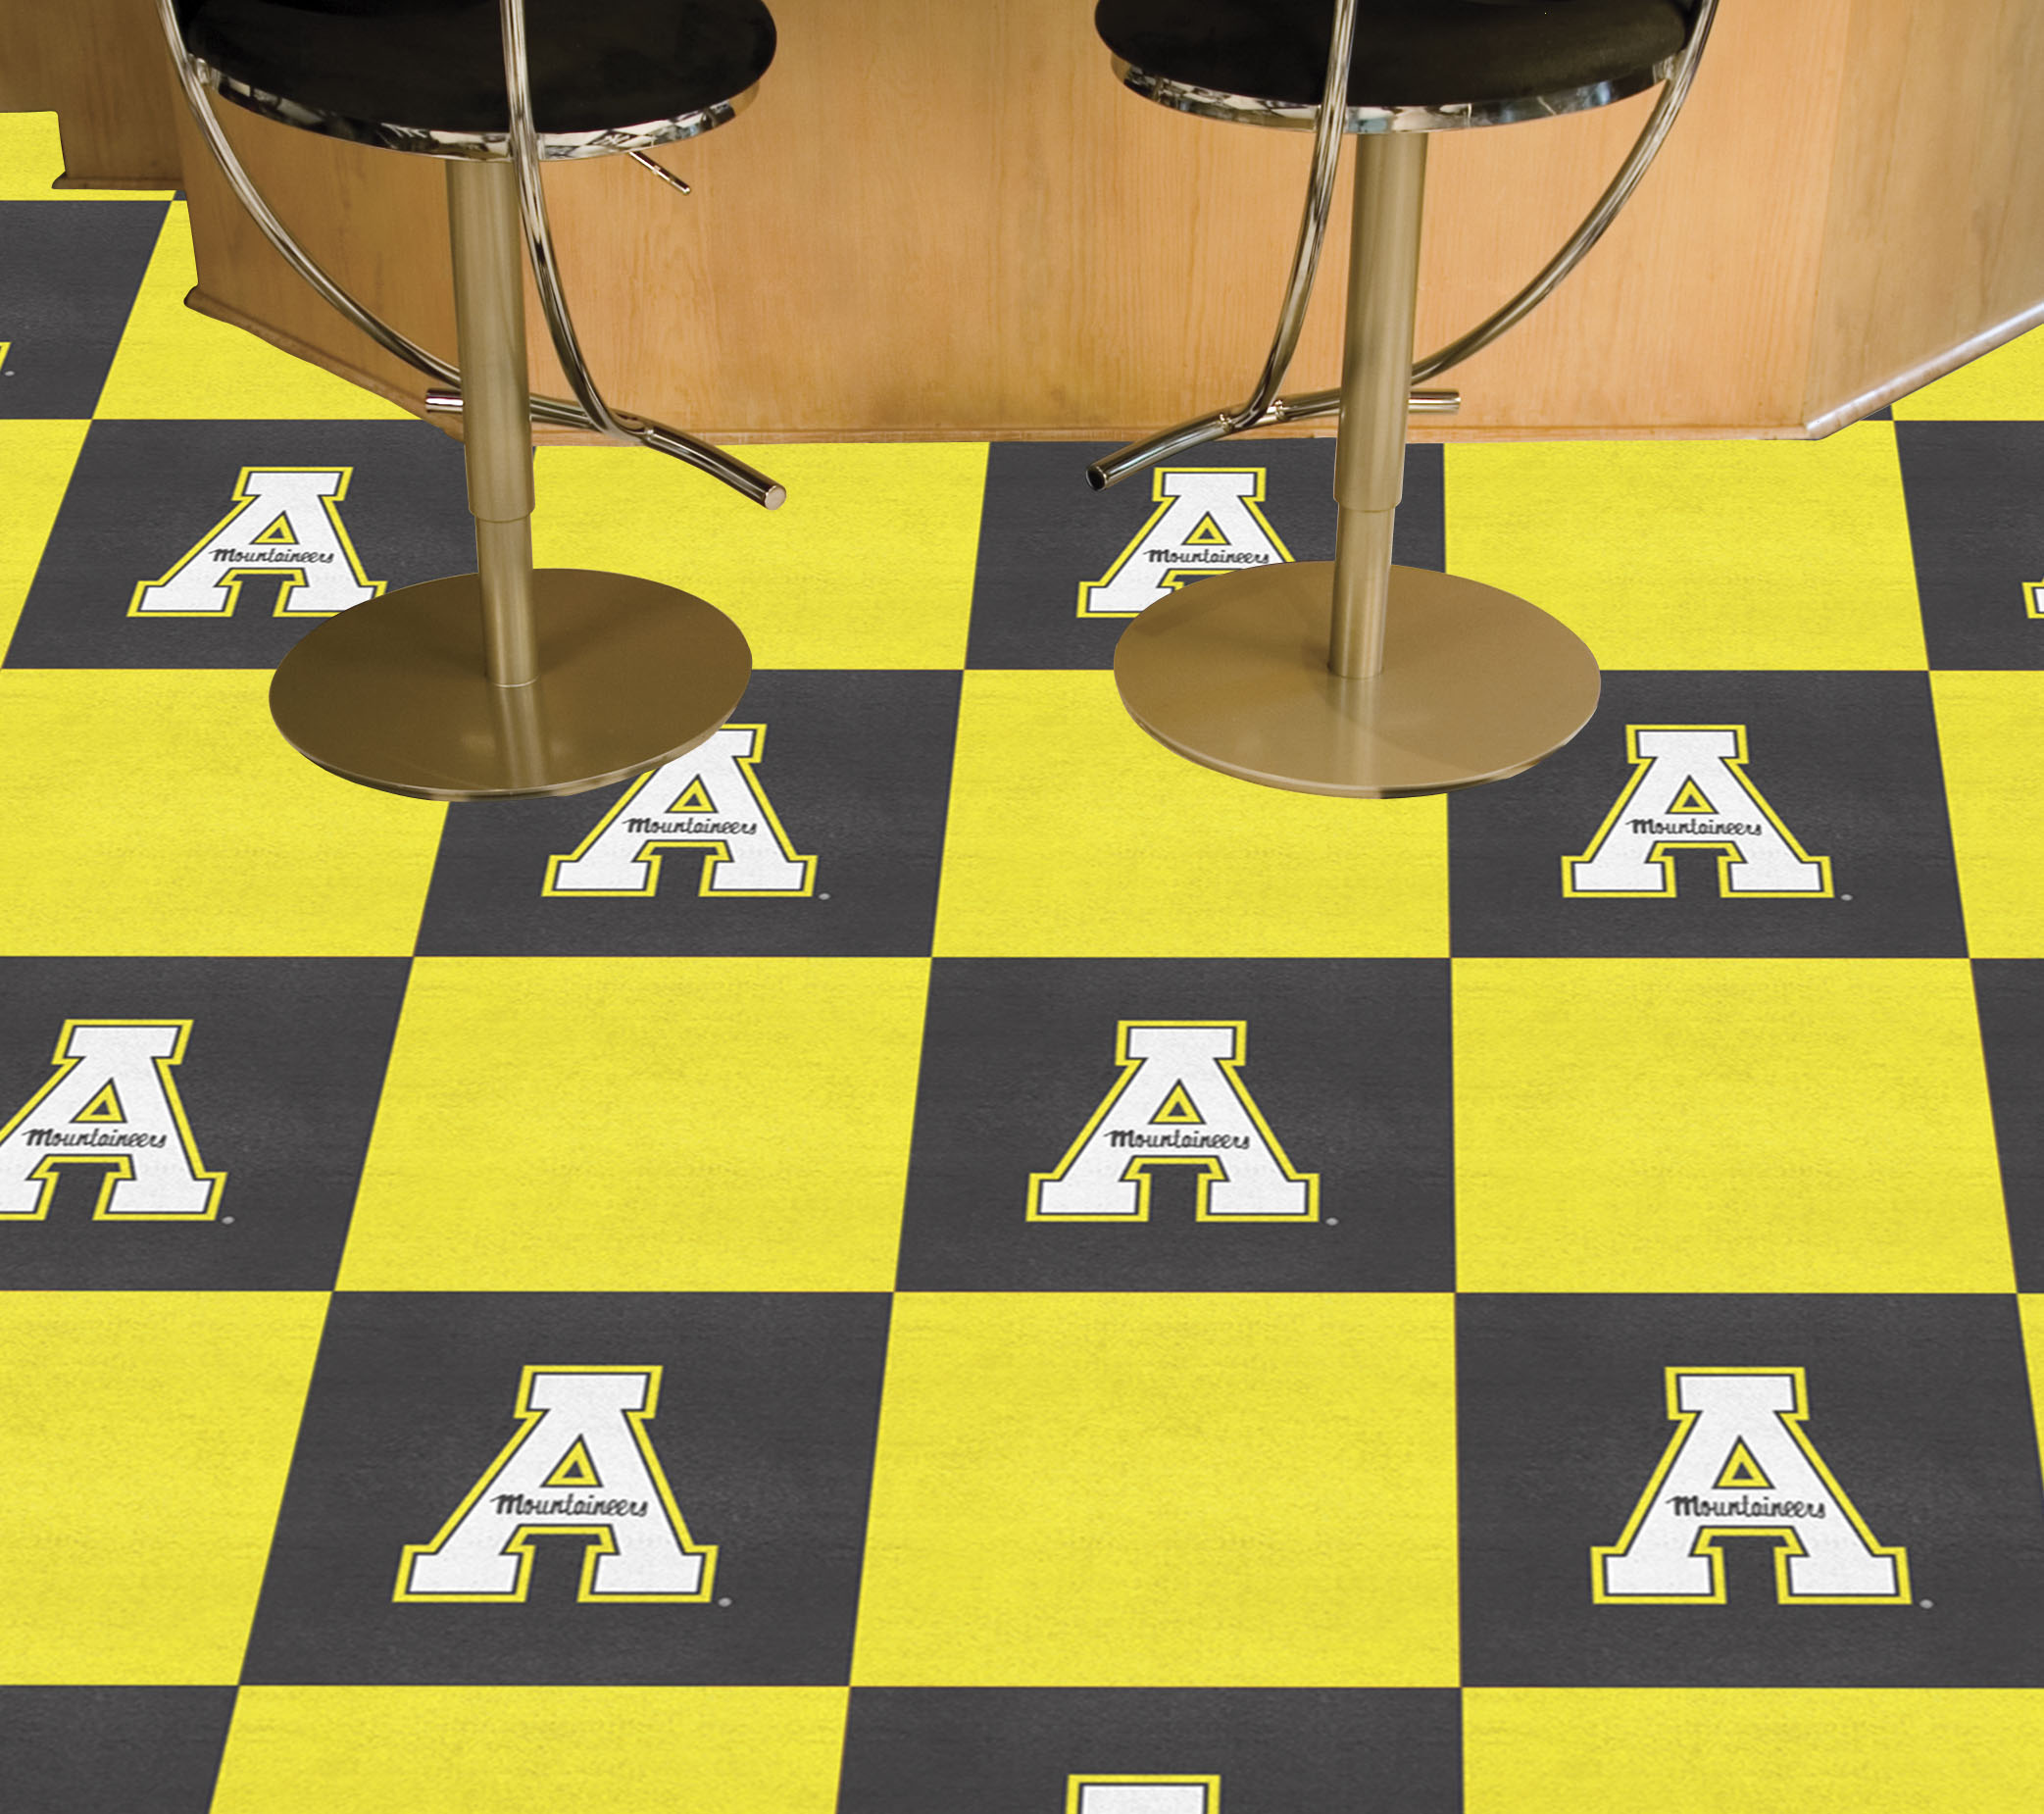 Appalachian State Mountaineers Team Carpet Tiles - 45 sq ft